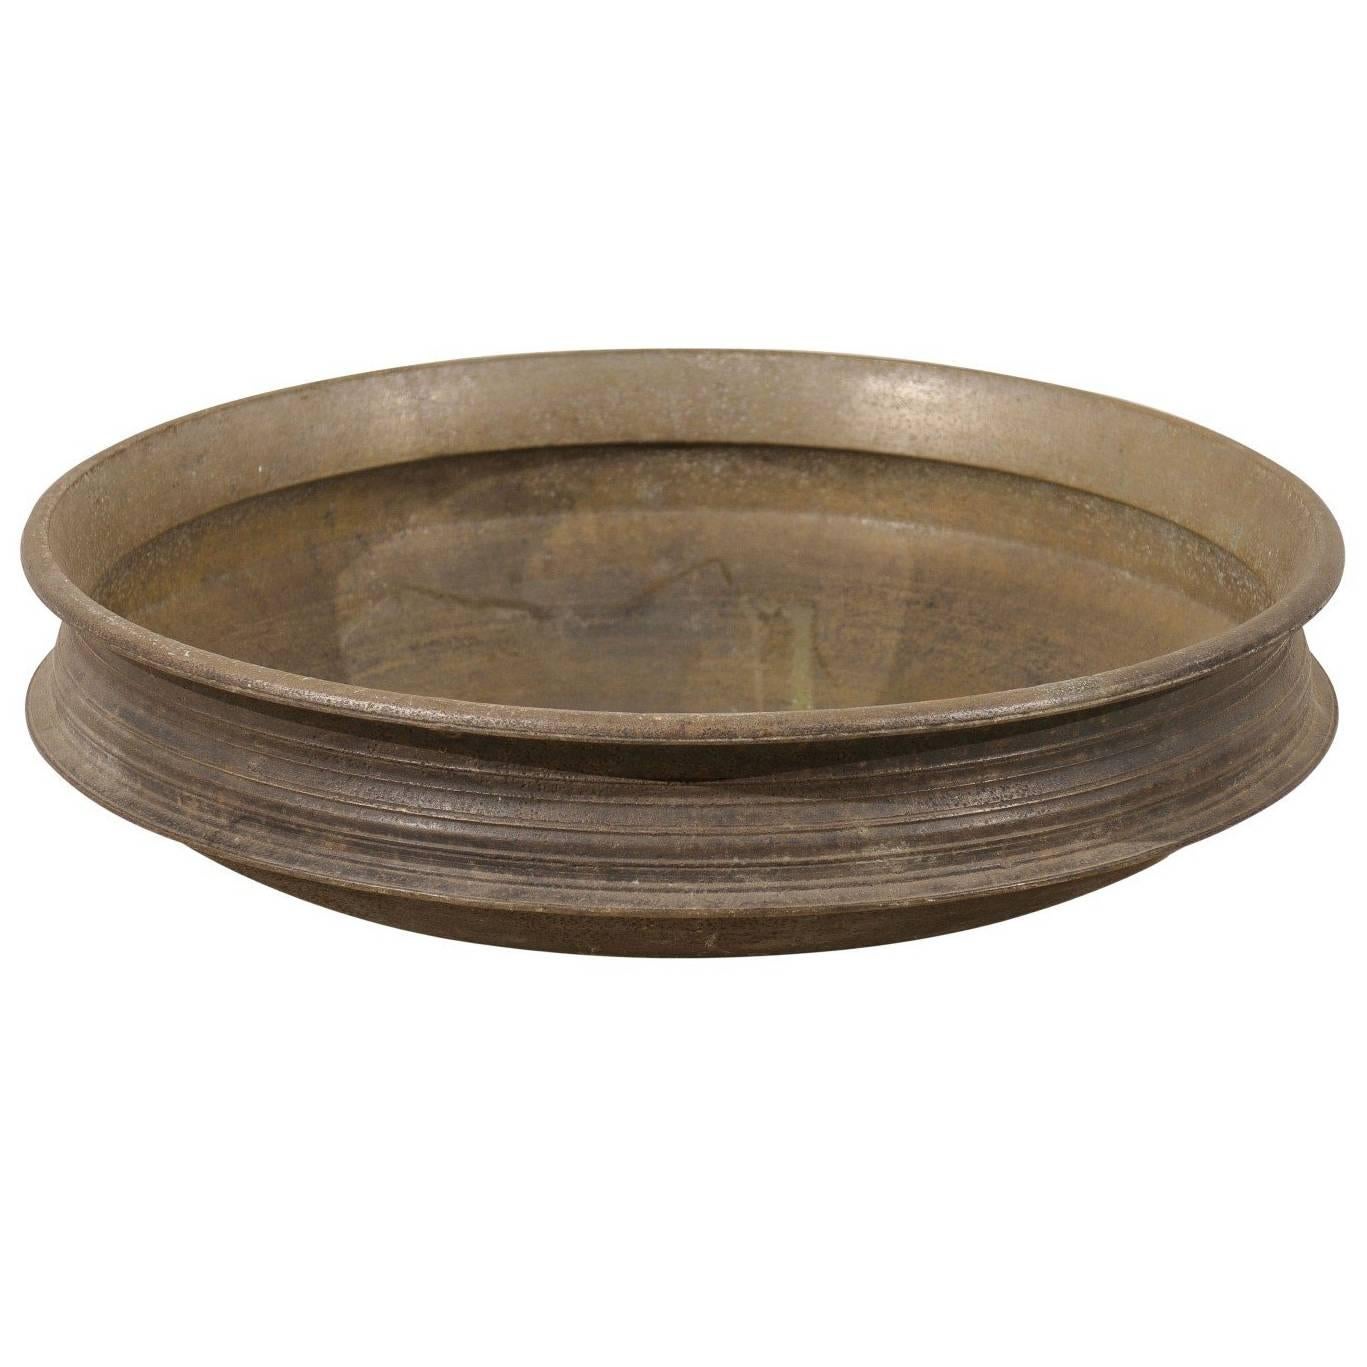 Indian Uruli Vessel from Early 20th Century and Made of Metal